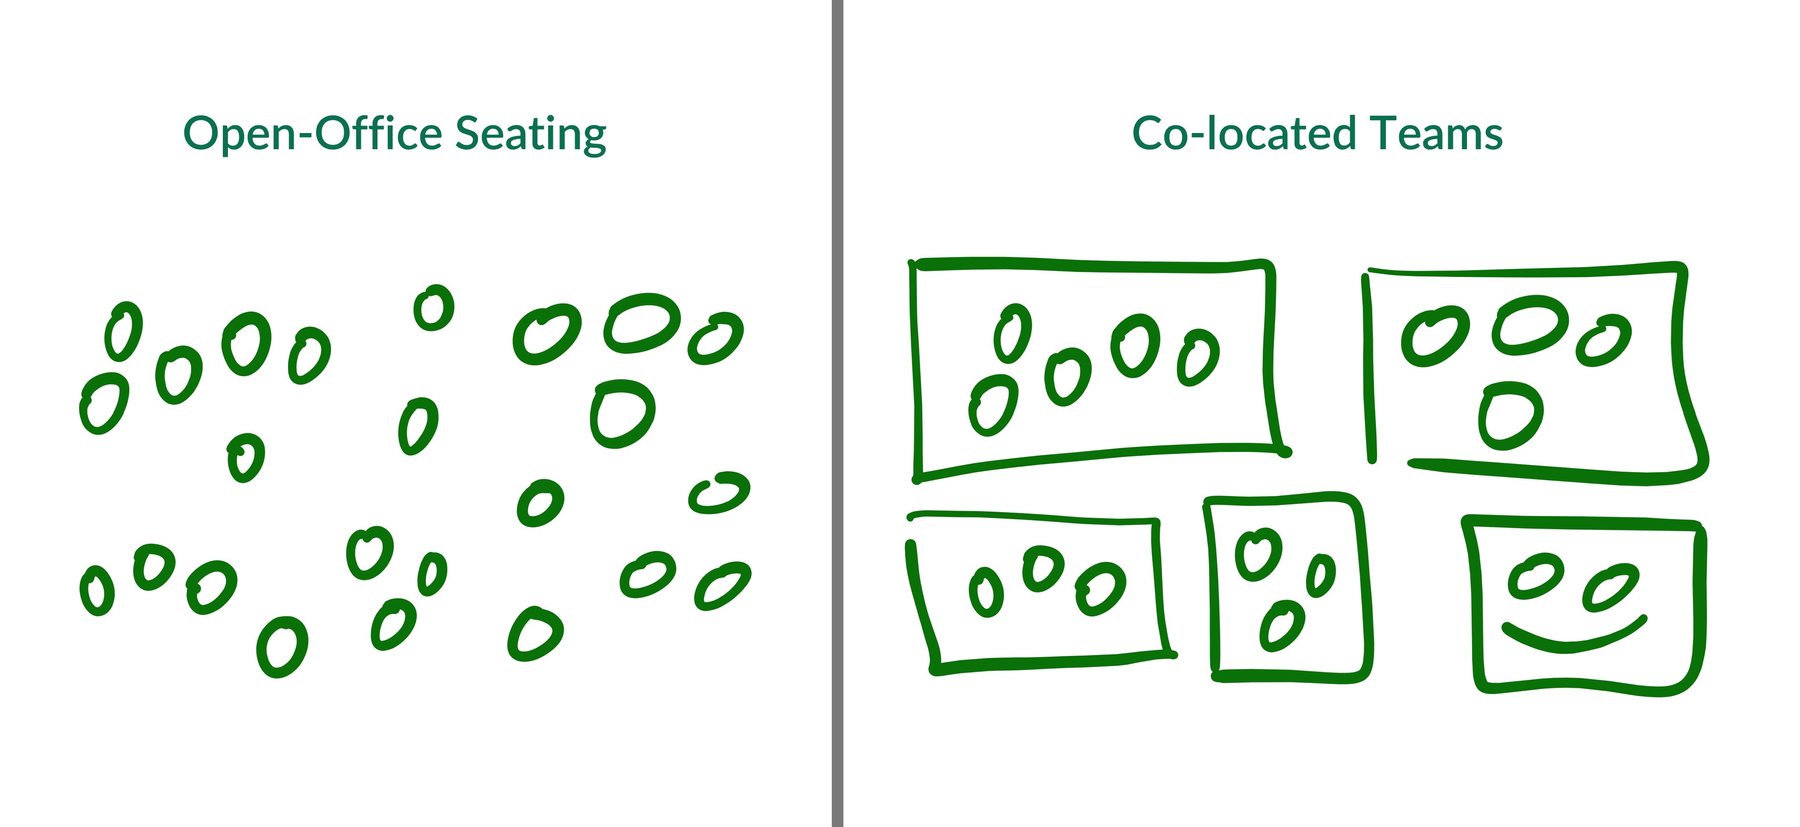 open-office floor plan, compared to co-located team spaces